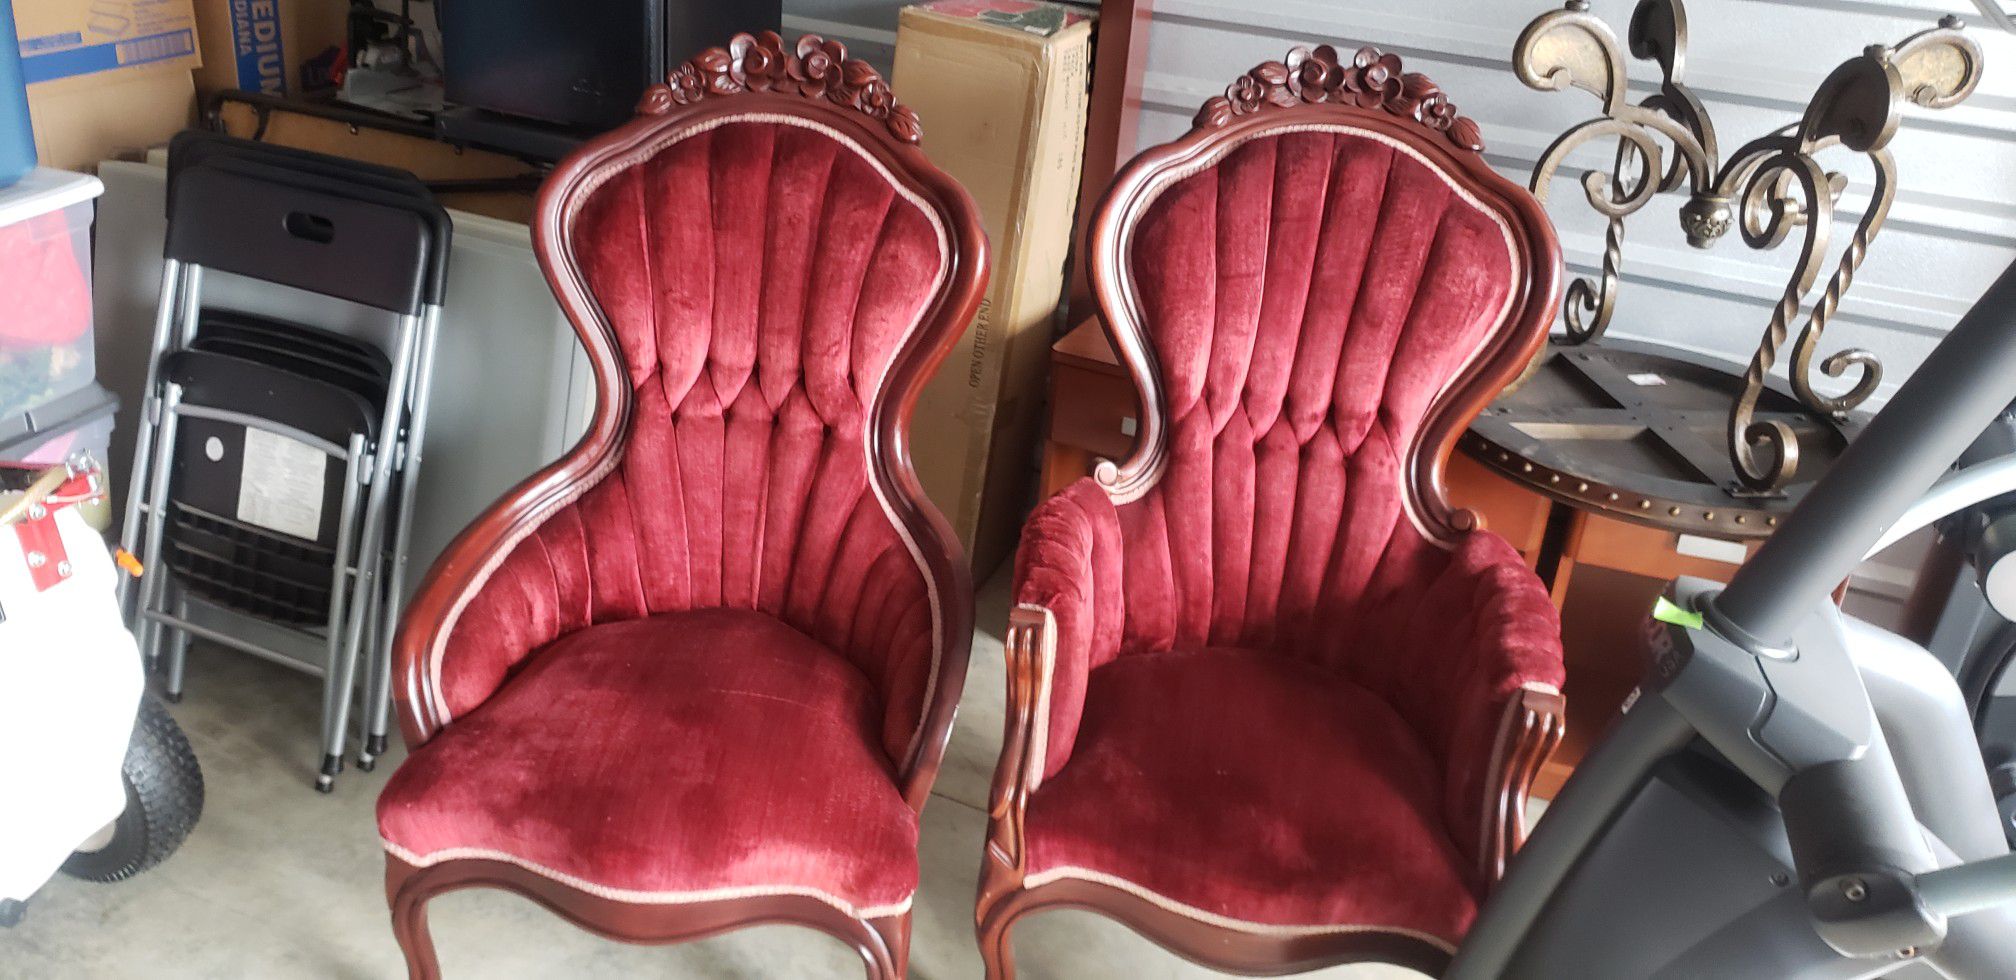 Really nice antique chairs.